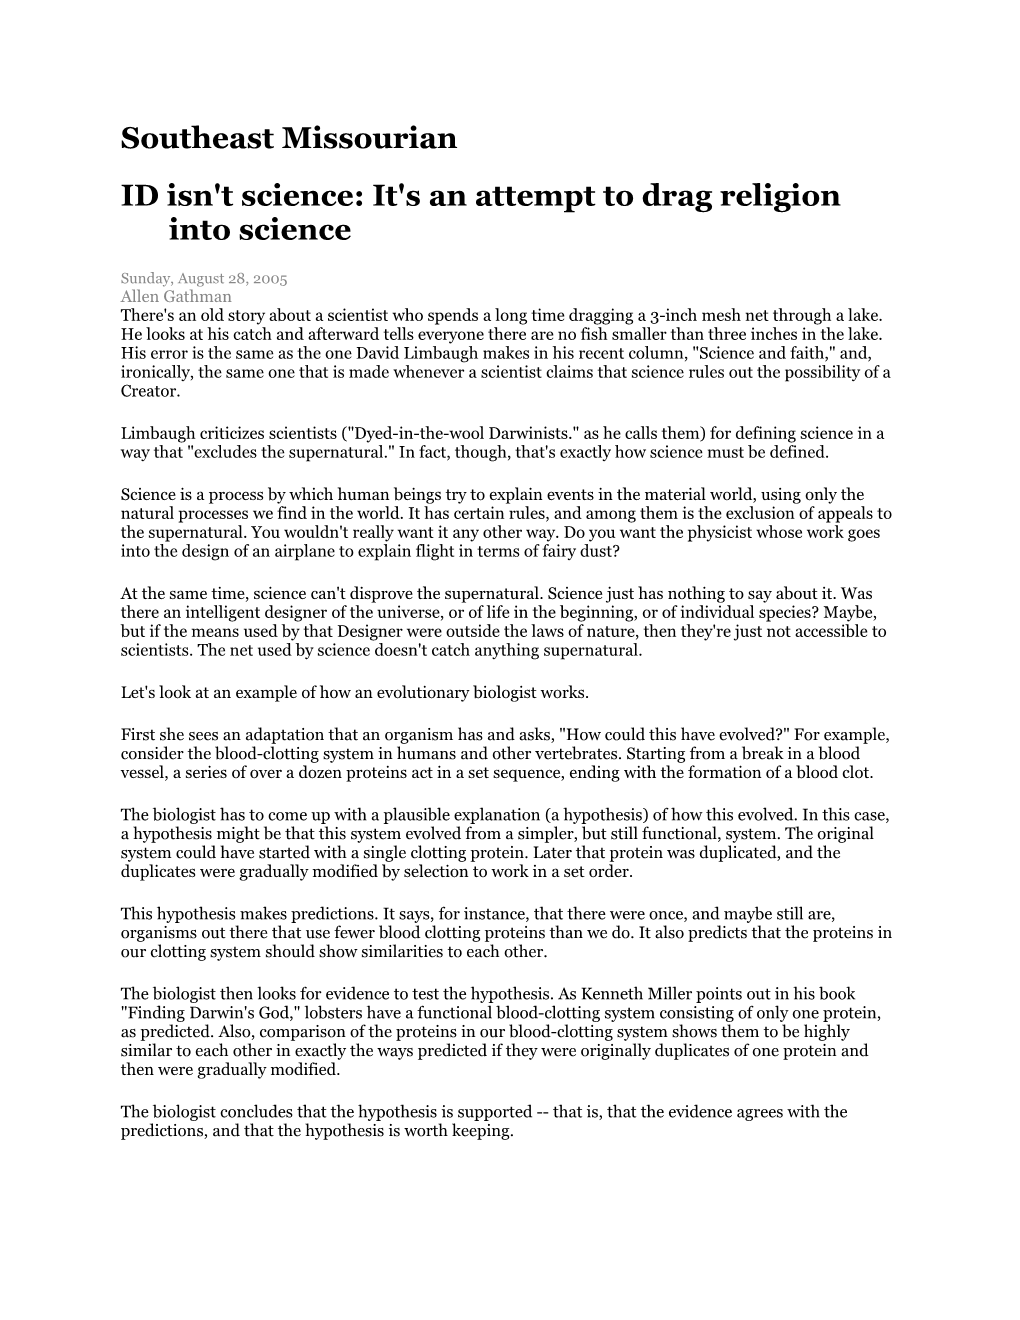 ID Isn't Science: It's an Attempt to Drag Religion Into Science